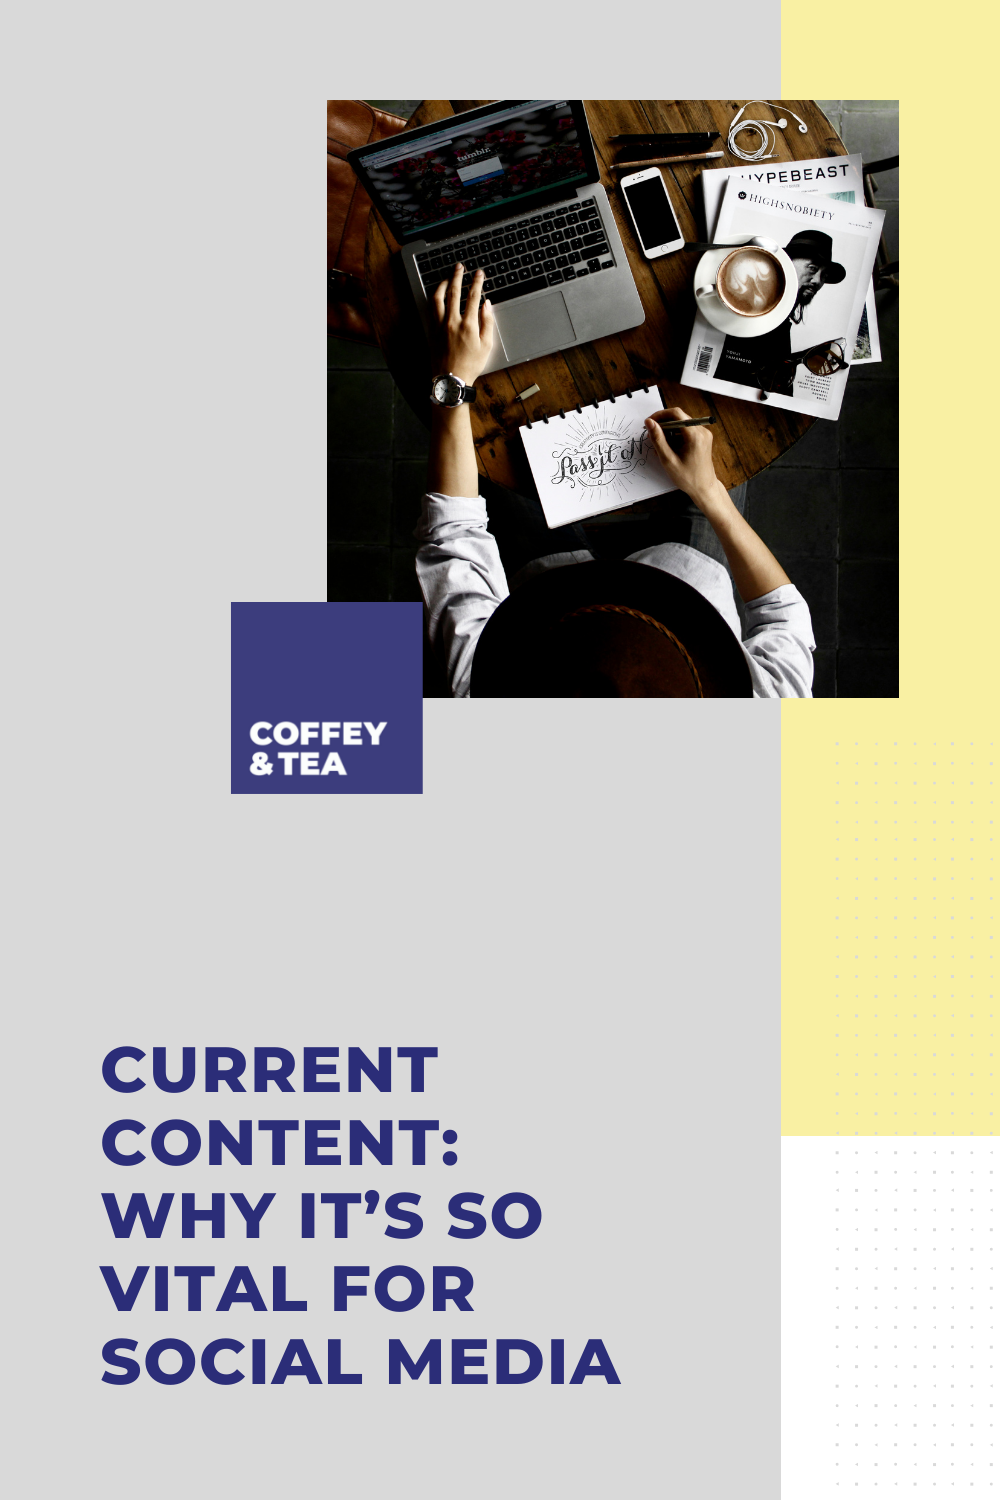 Current Content: Why it’s so vital for social media